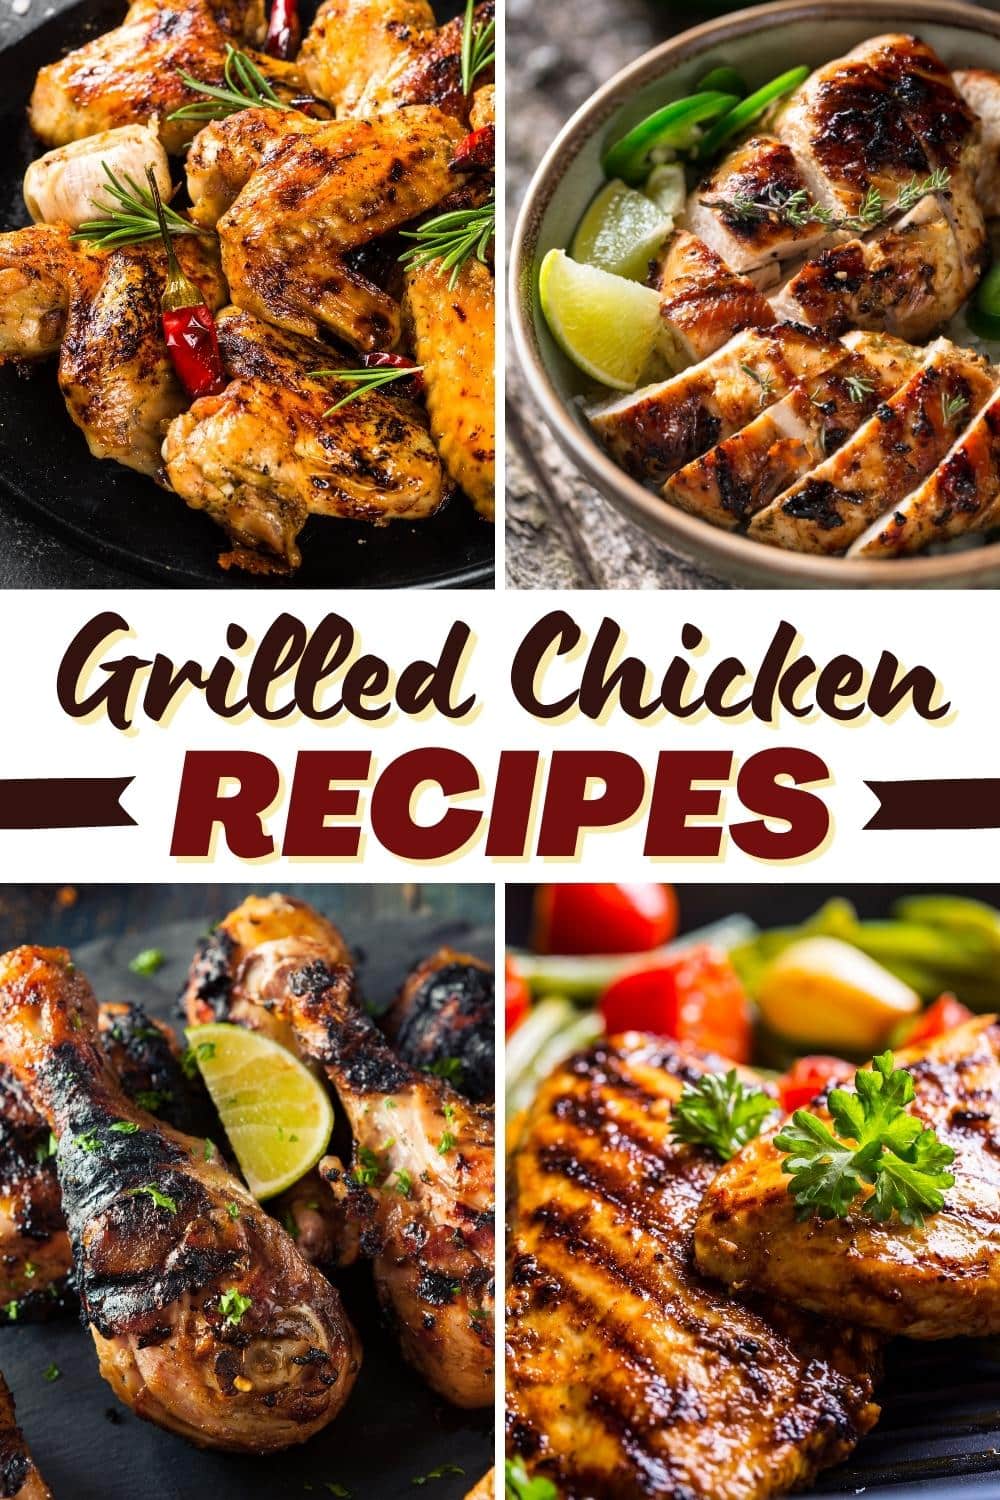 25 Easy Grilled Chicken Recipes to Put on Repeat - Insanely Good